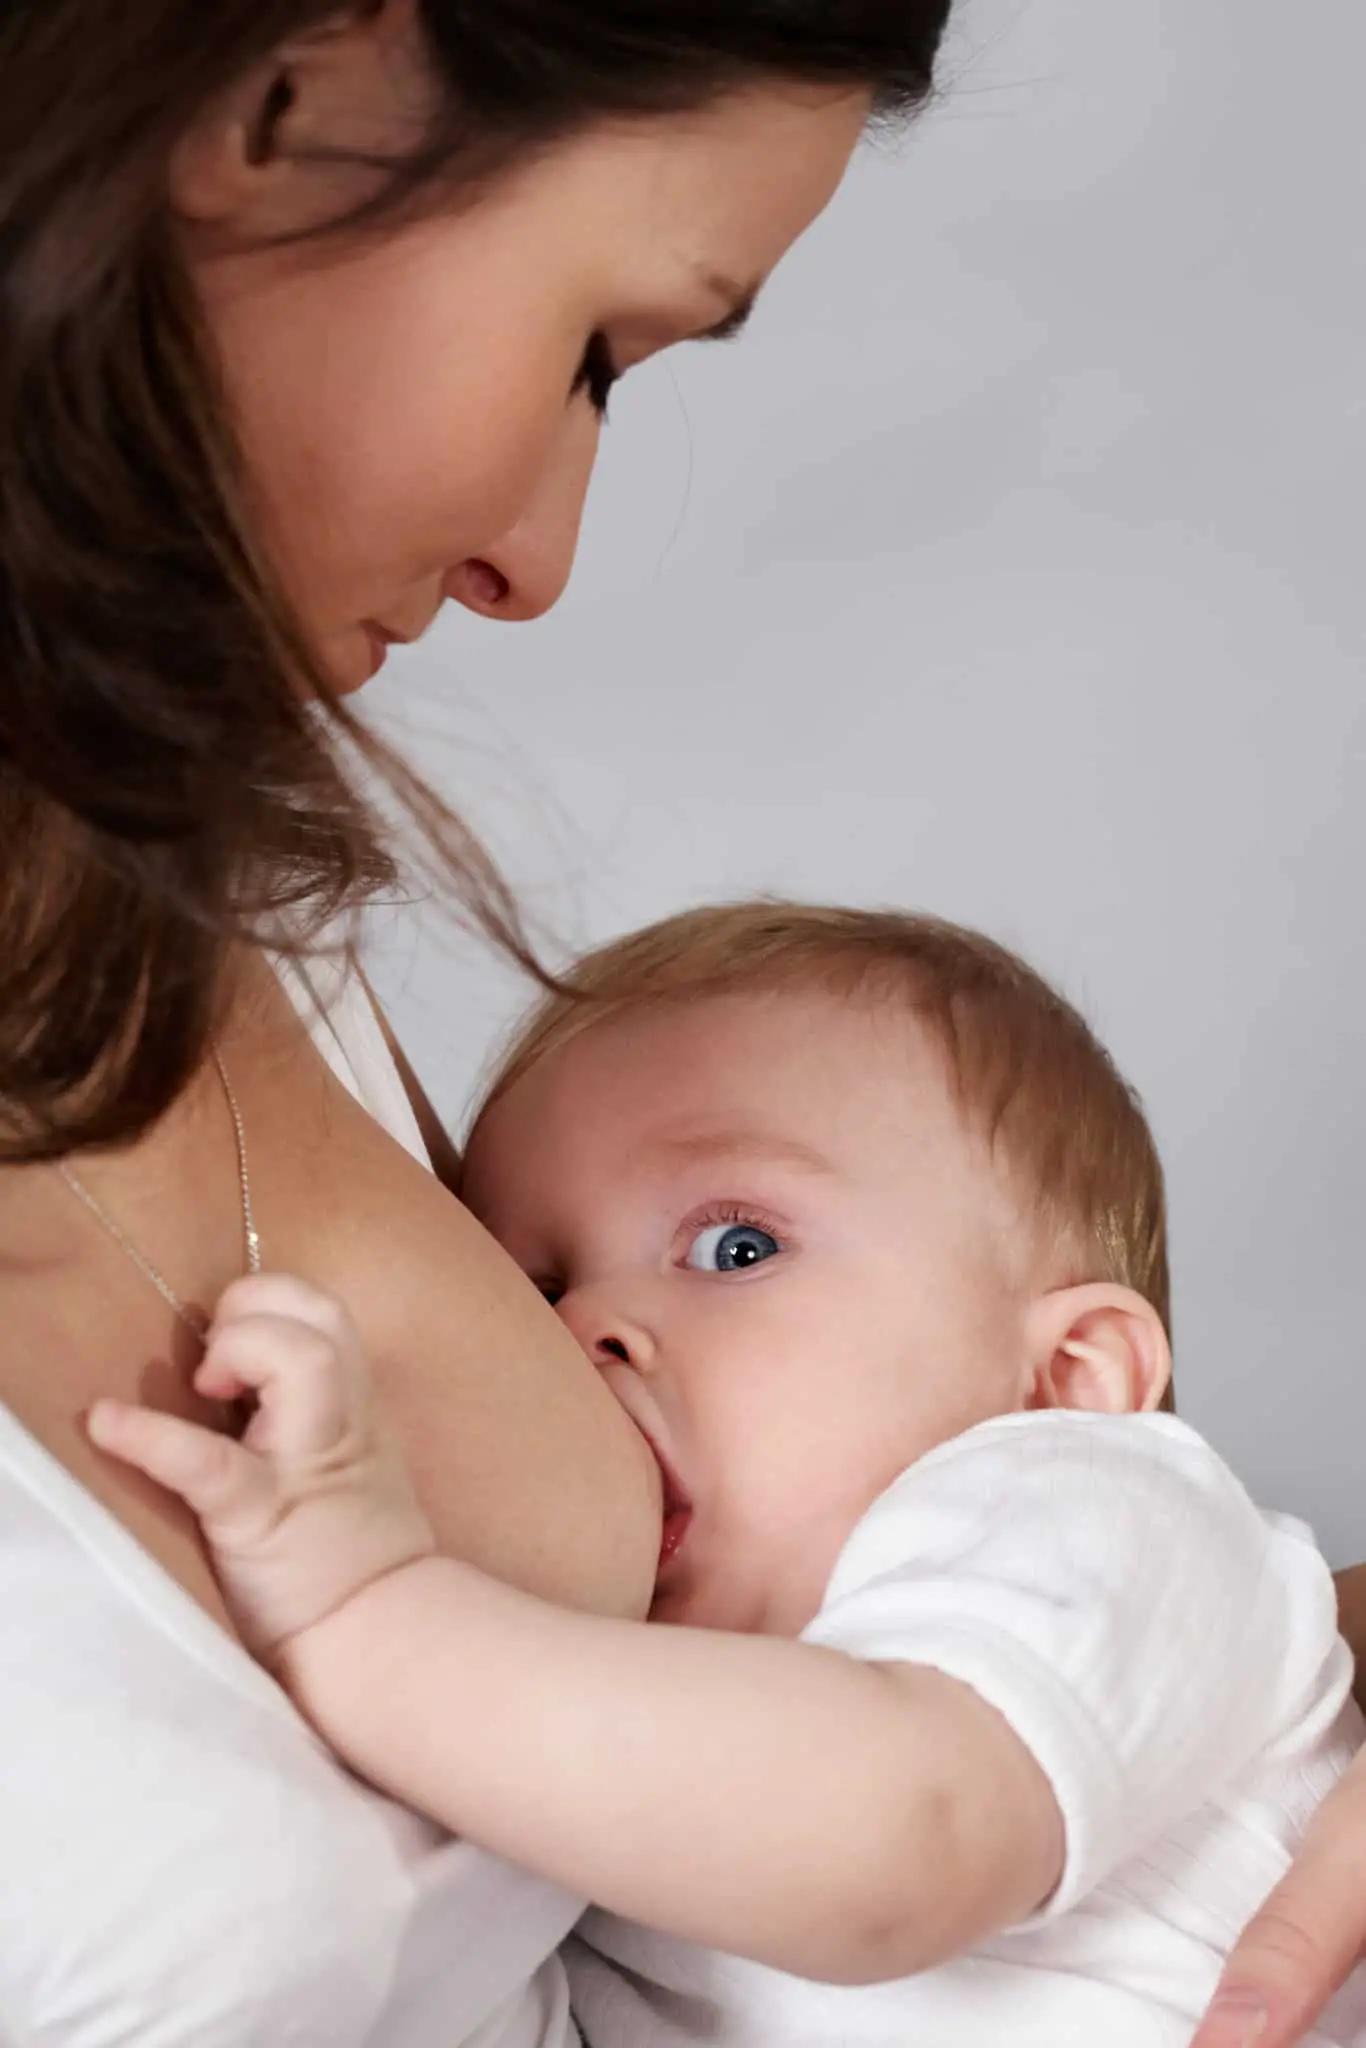 How Much Breast Milk Does A Baby Need? What You Need To Know